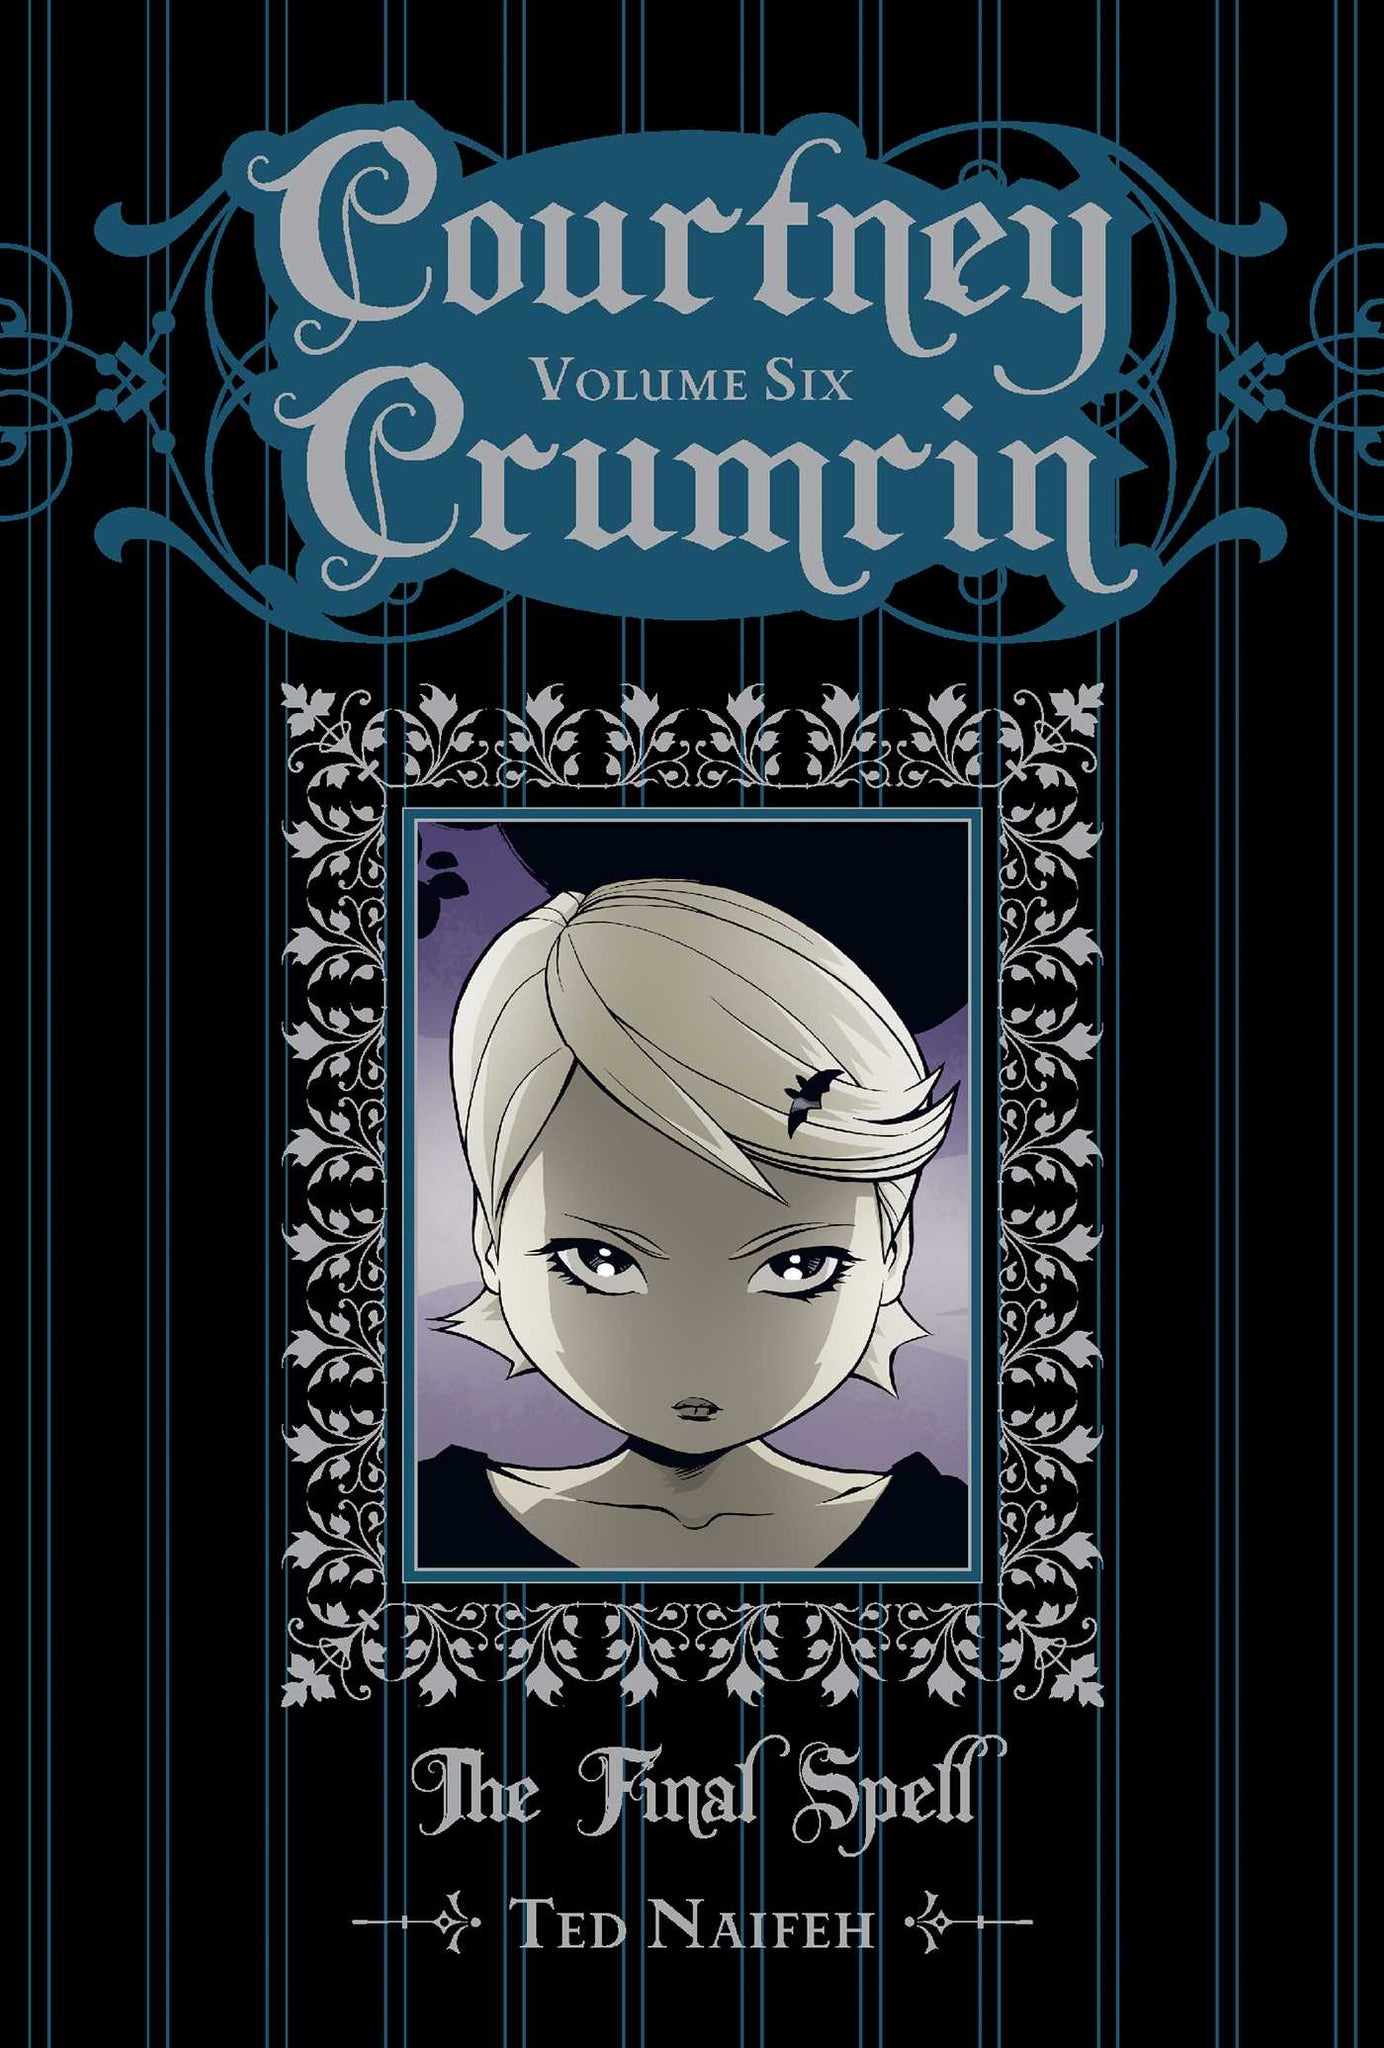 Courtney Crumrin Vol. 6 : The Final Spell